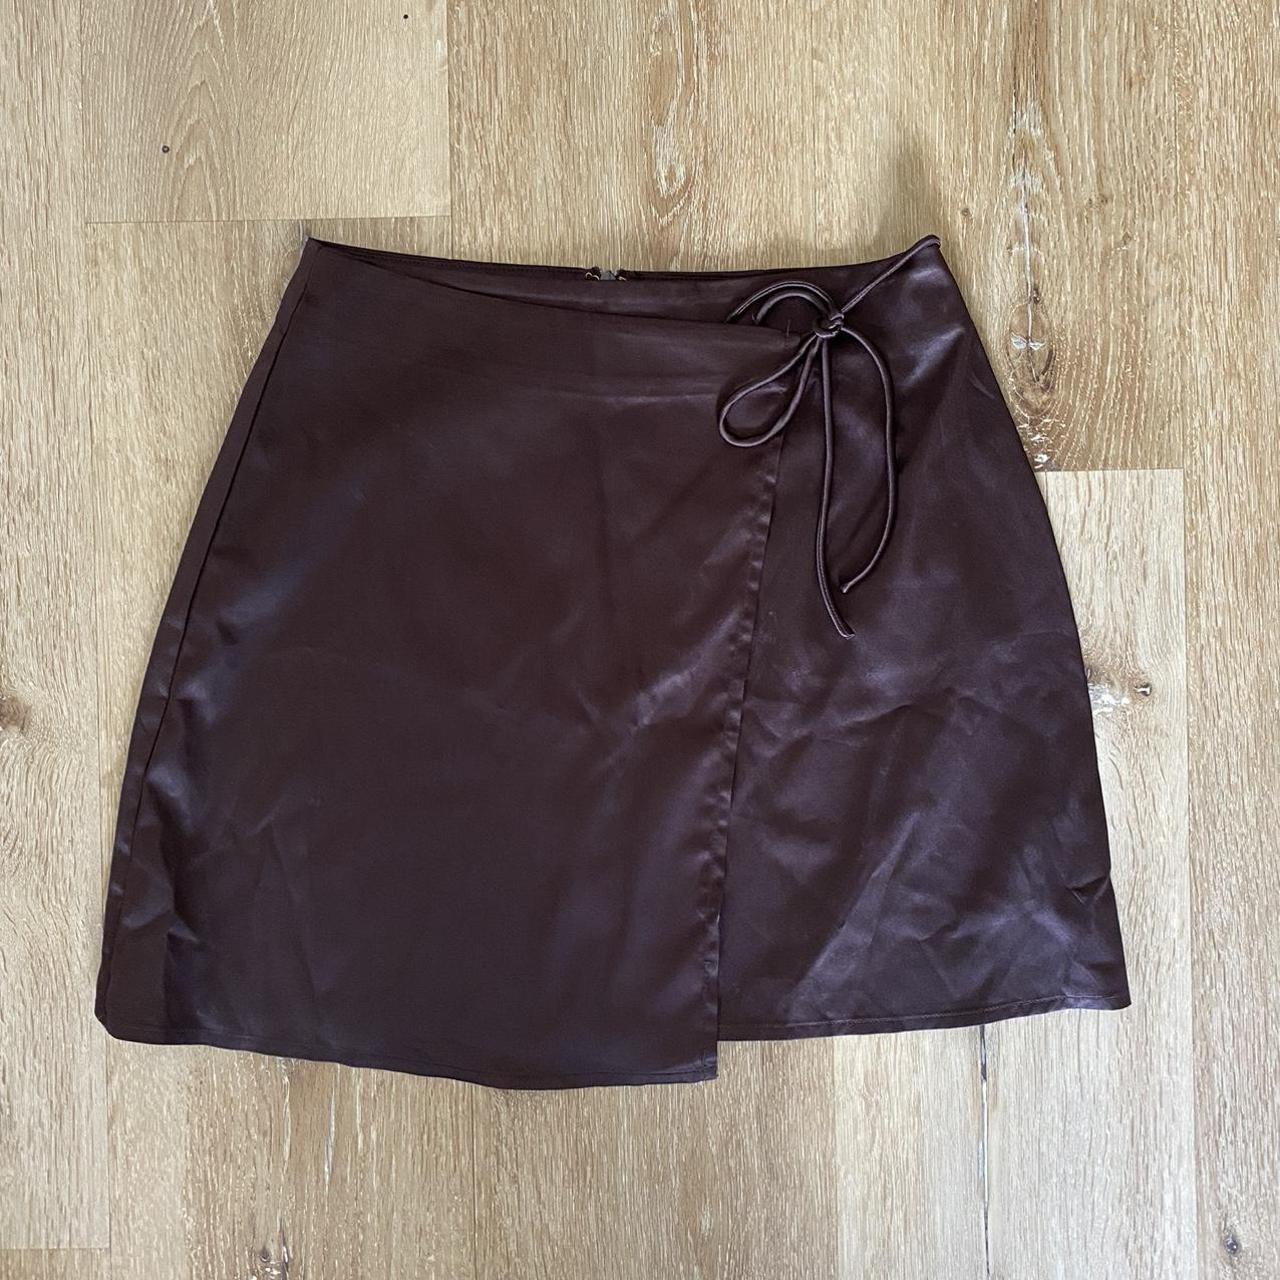 Universal store luck and trouble wrap skirt Size 8... - Depop